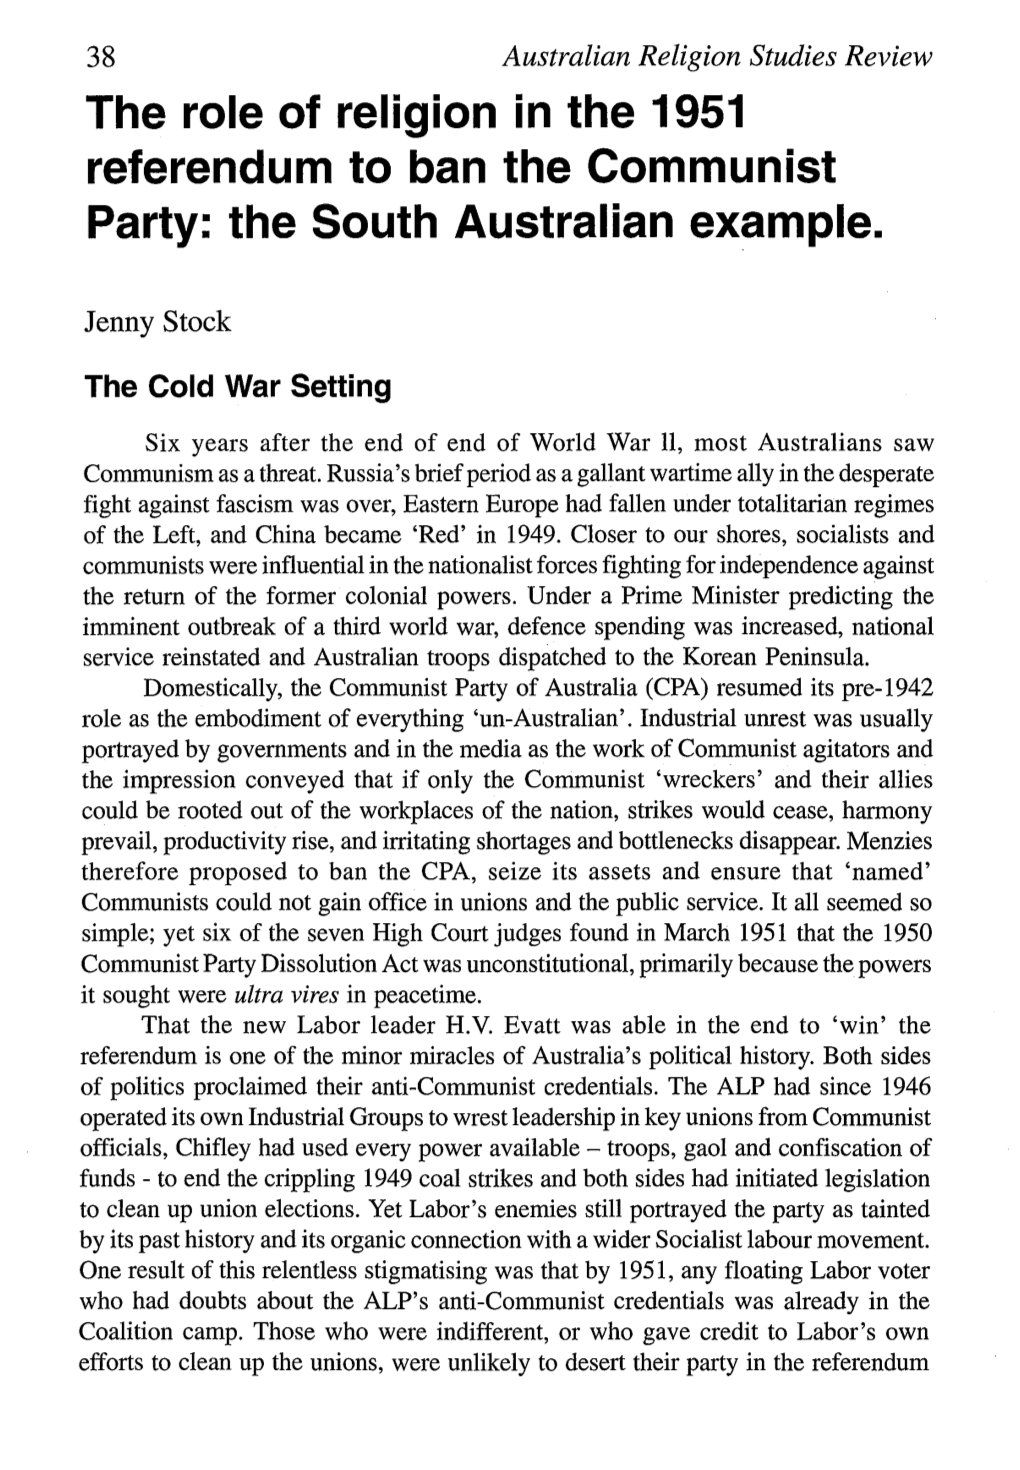 The Role of Religion in the 1951 Referendum to Ban the Communist Party: the South Australian Example